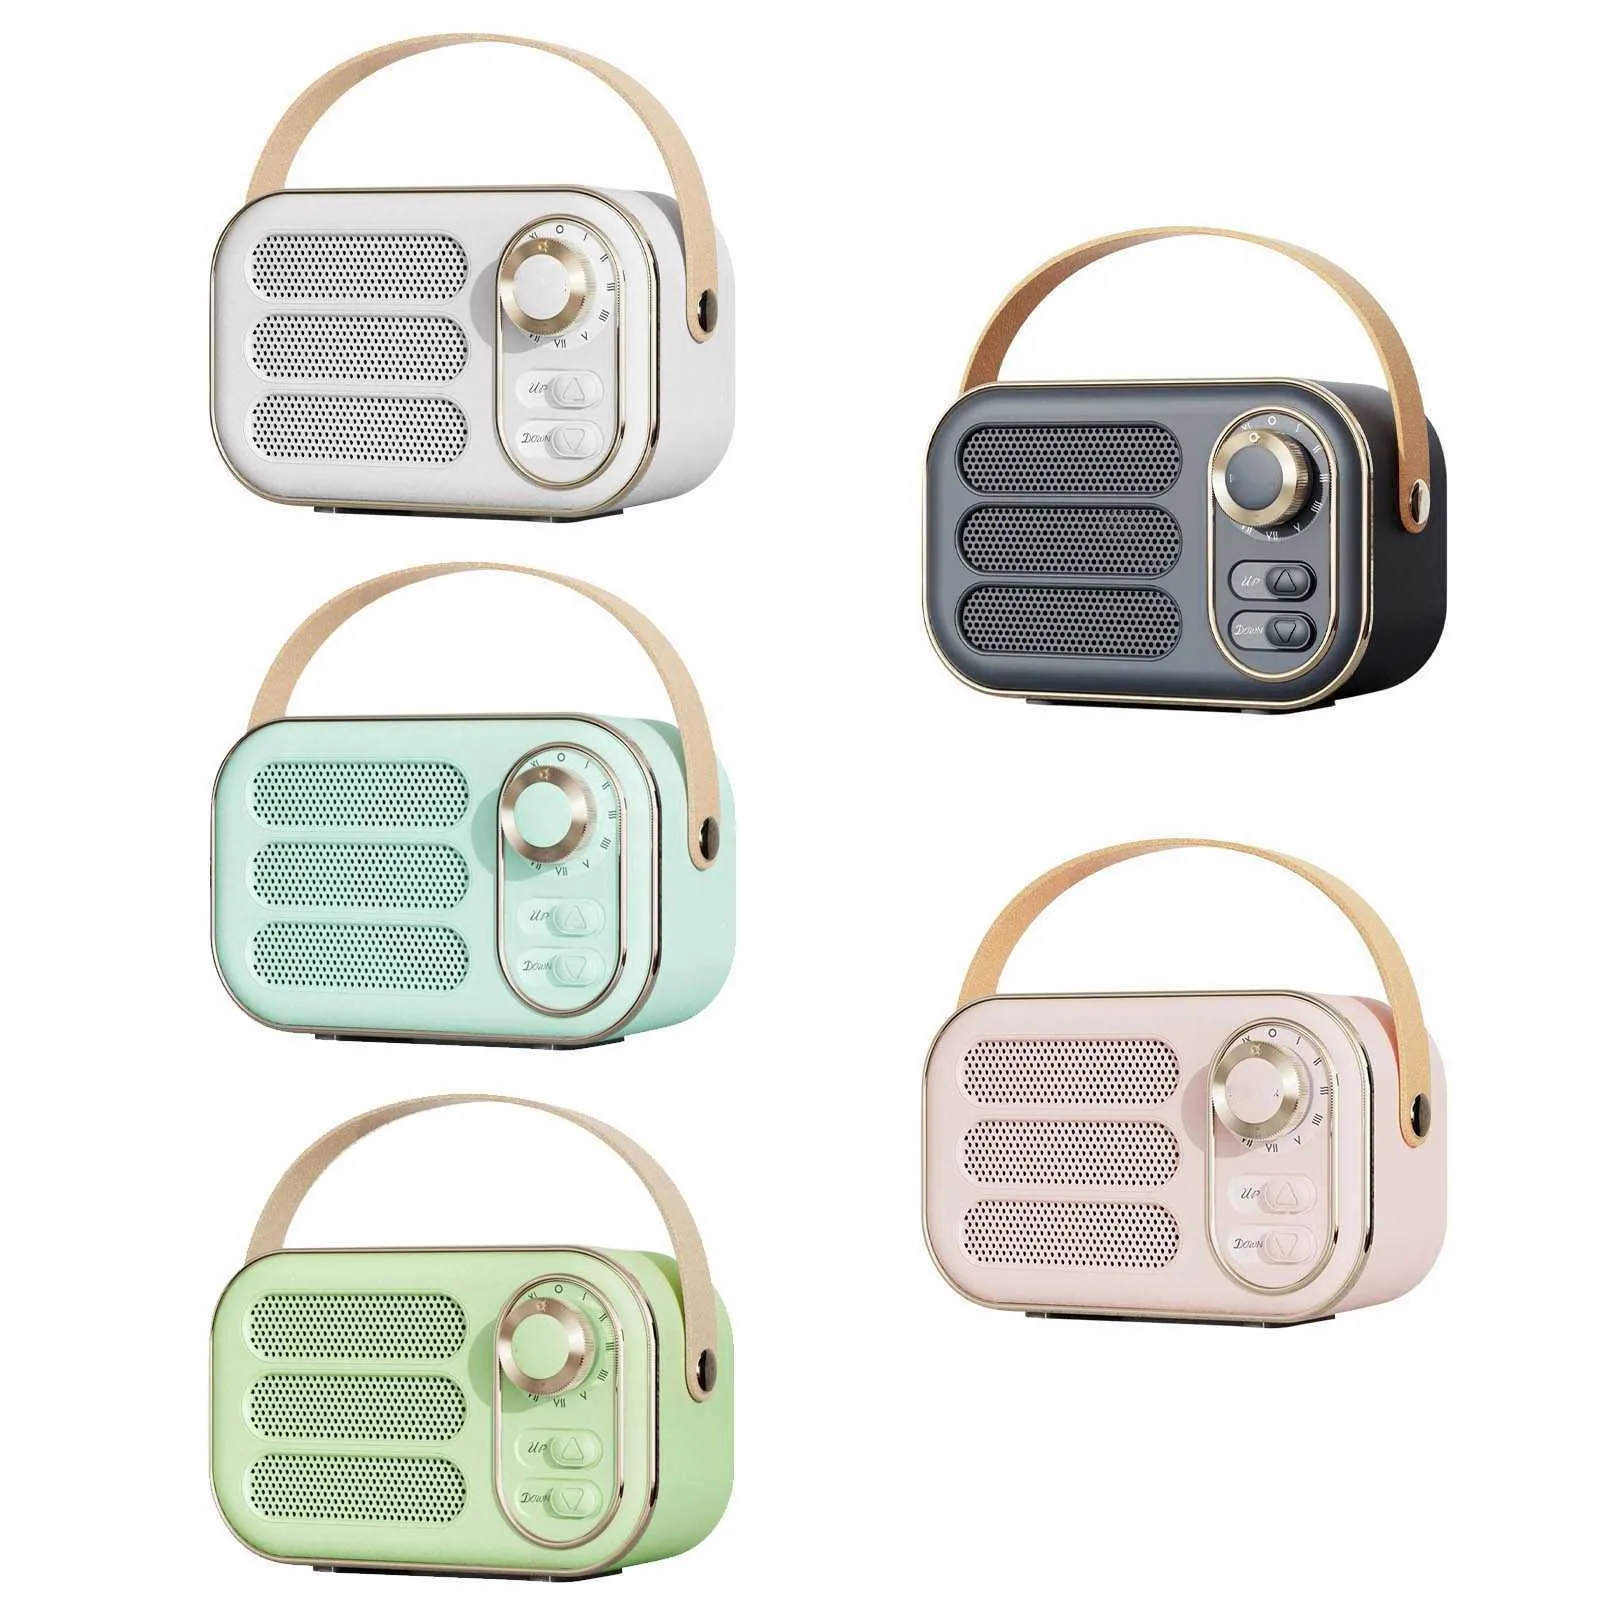 Retro Vintage Bluetooth Speaker Portable, Cute, And Vintage Design For  Kitchen, Bedroom, Office, Parties Compatible With IOS And Android Devices  P230414 From Wangcai09, $14.89